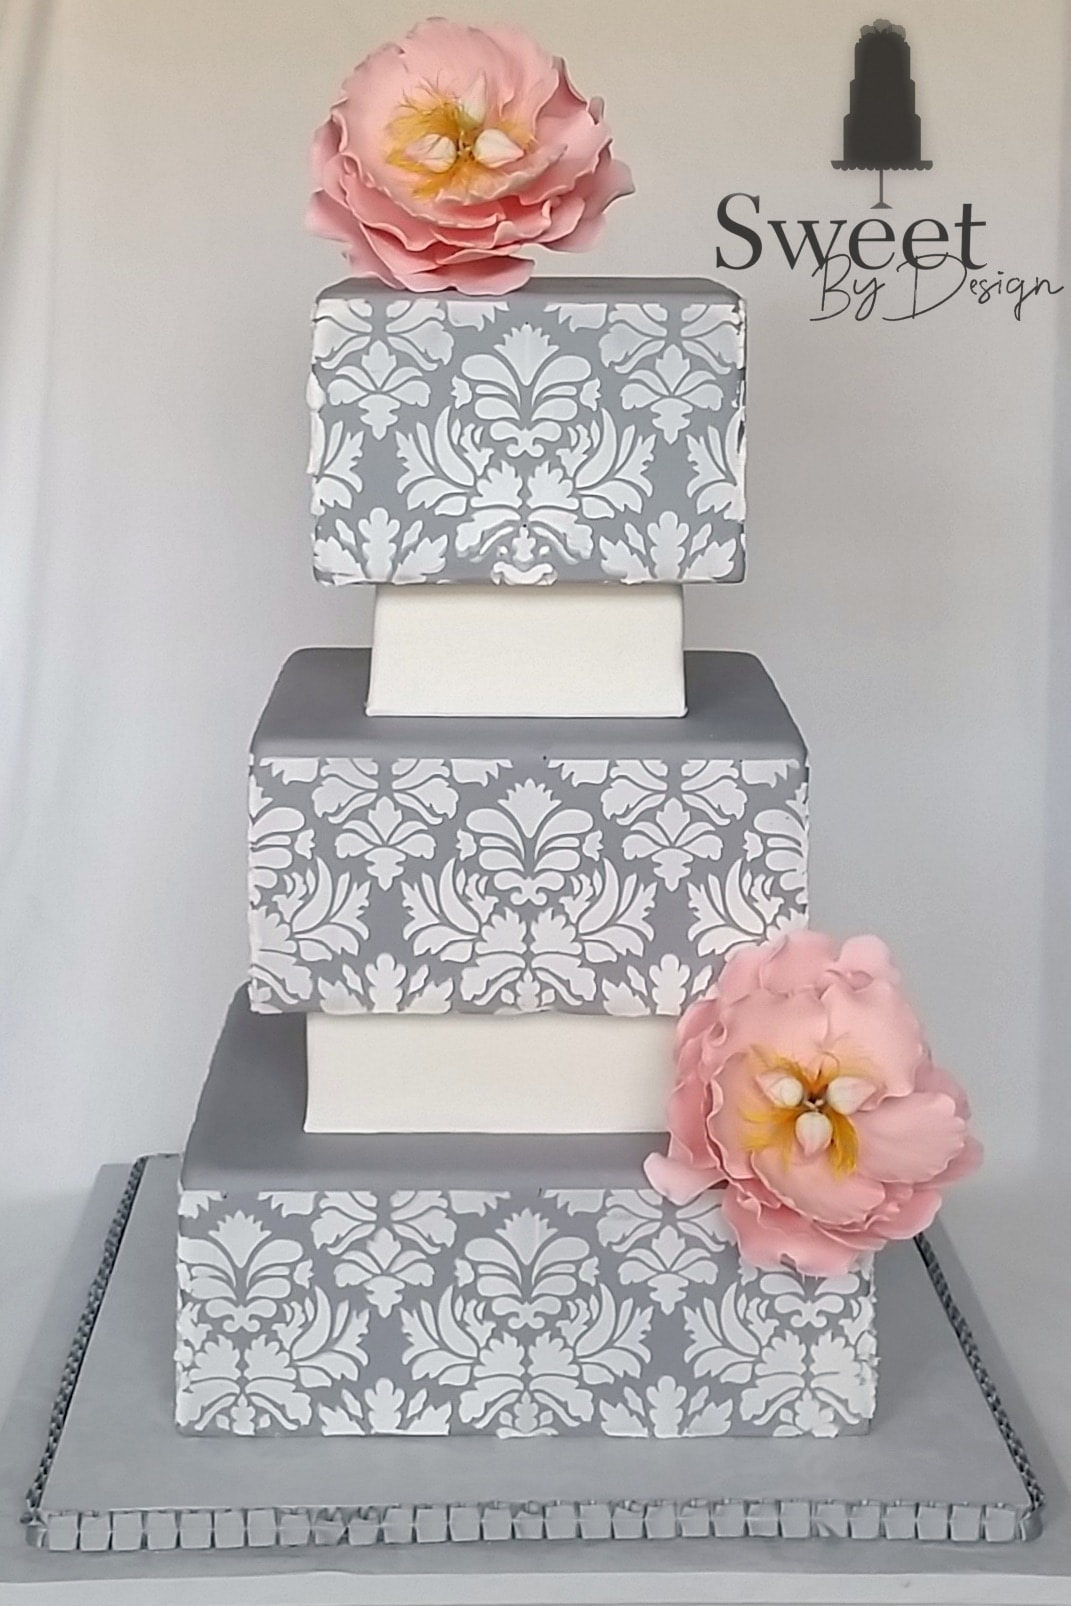 Grey and white damask wedding cake with pink fondant flowers by Sweet By Design